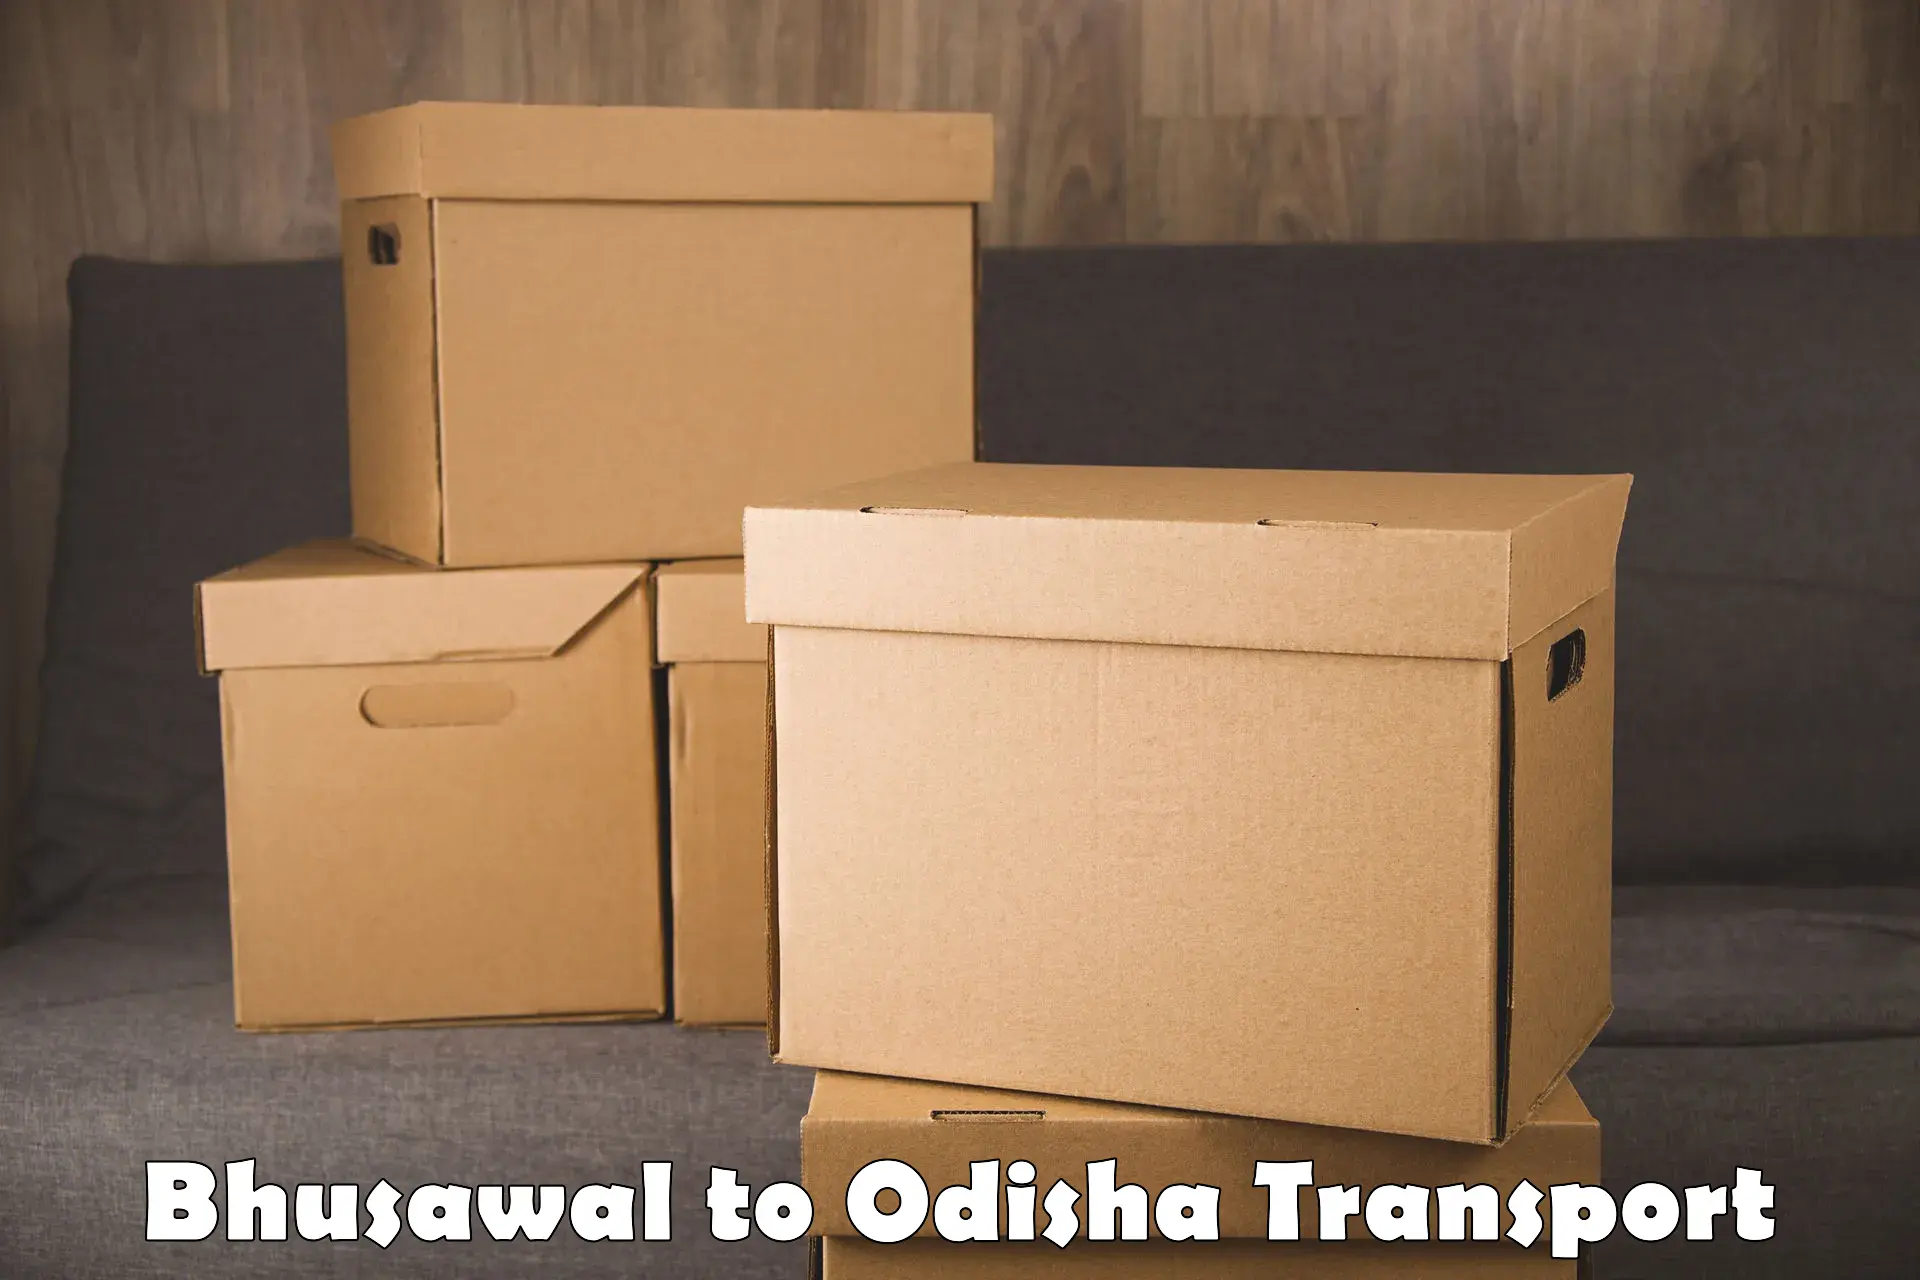 Truck transport companies in India Bhusawal to Anandapur